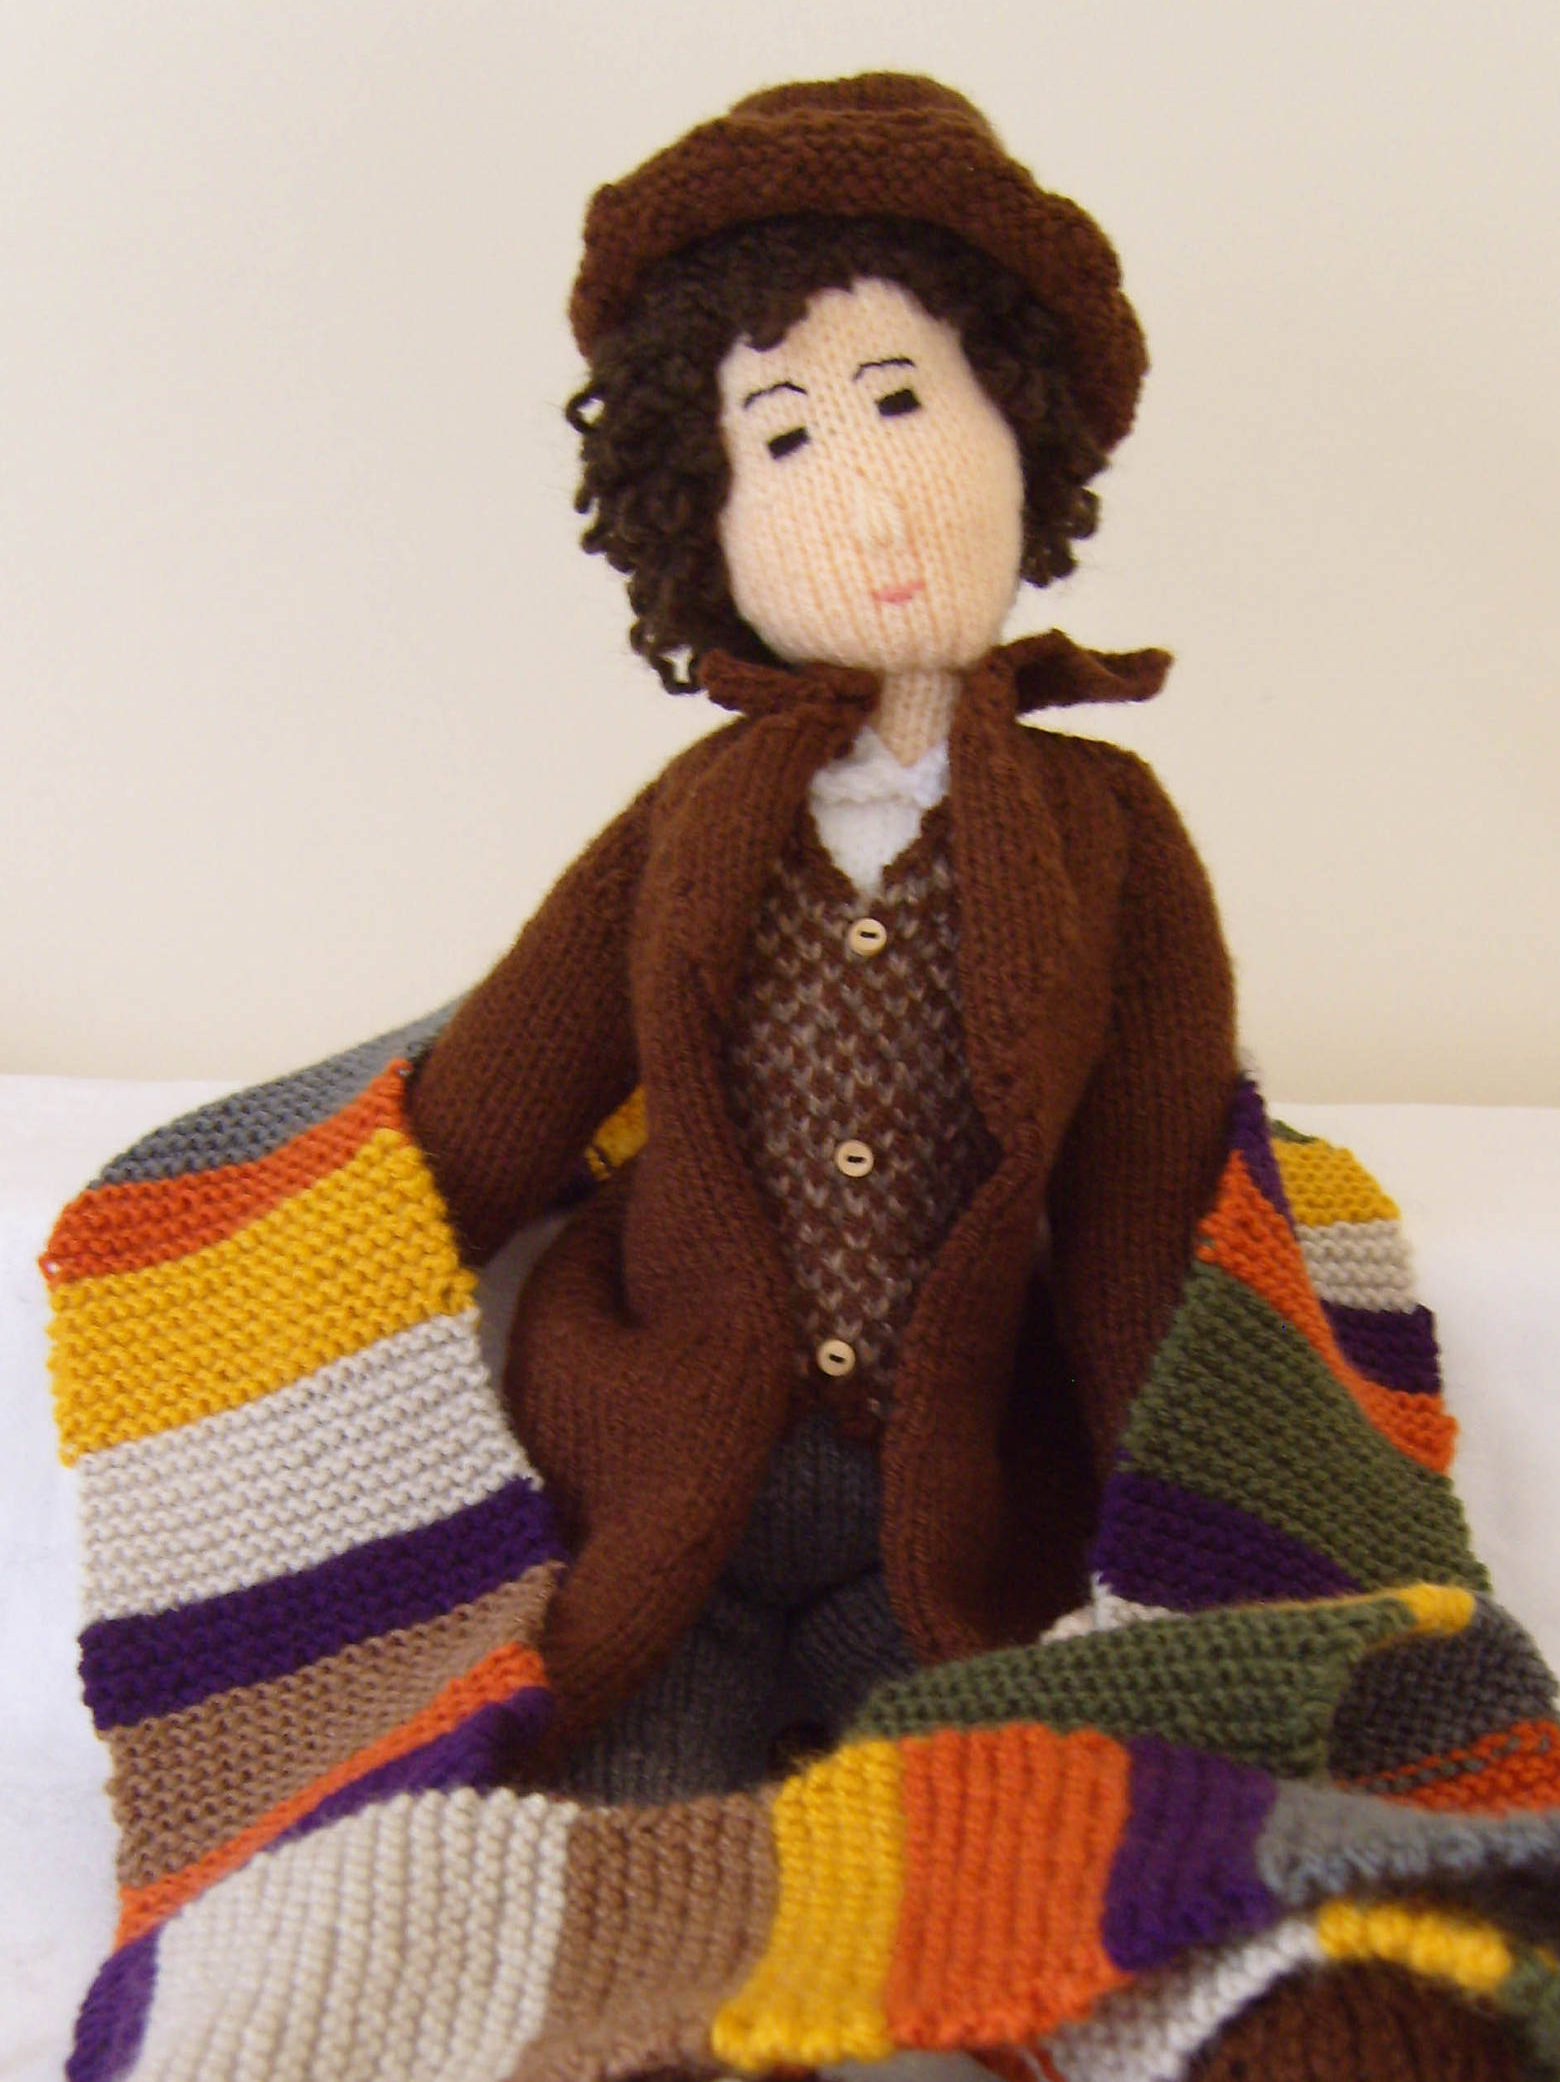 Doctor Who Crochet Blanket Pattern Doctor Who Knitting Patterns In The Loop Knitting